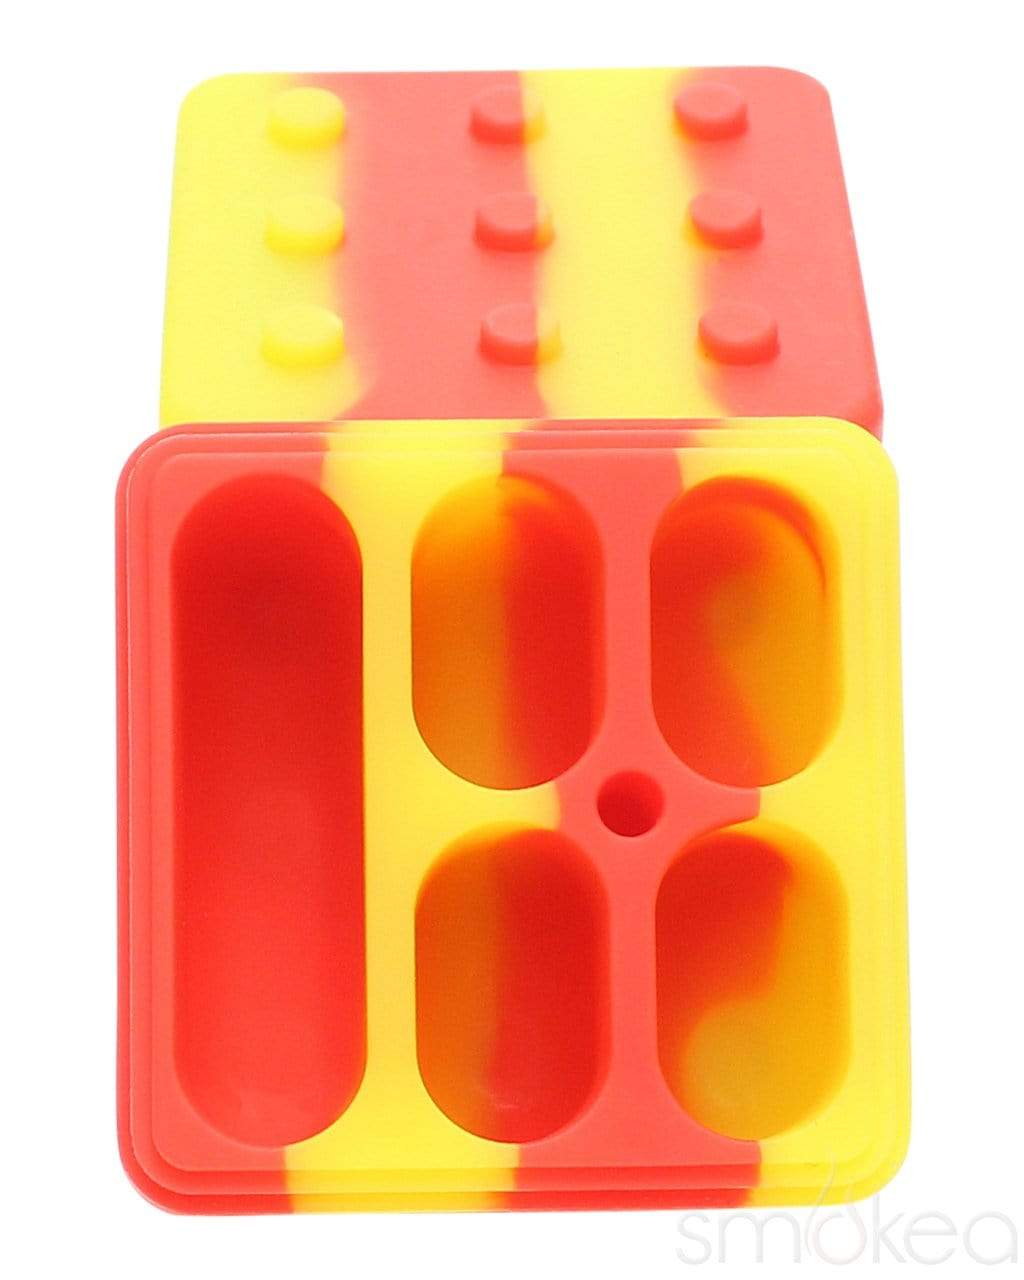 Buy Lego Style Silicone Container for Smoking with Discounted Price